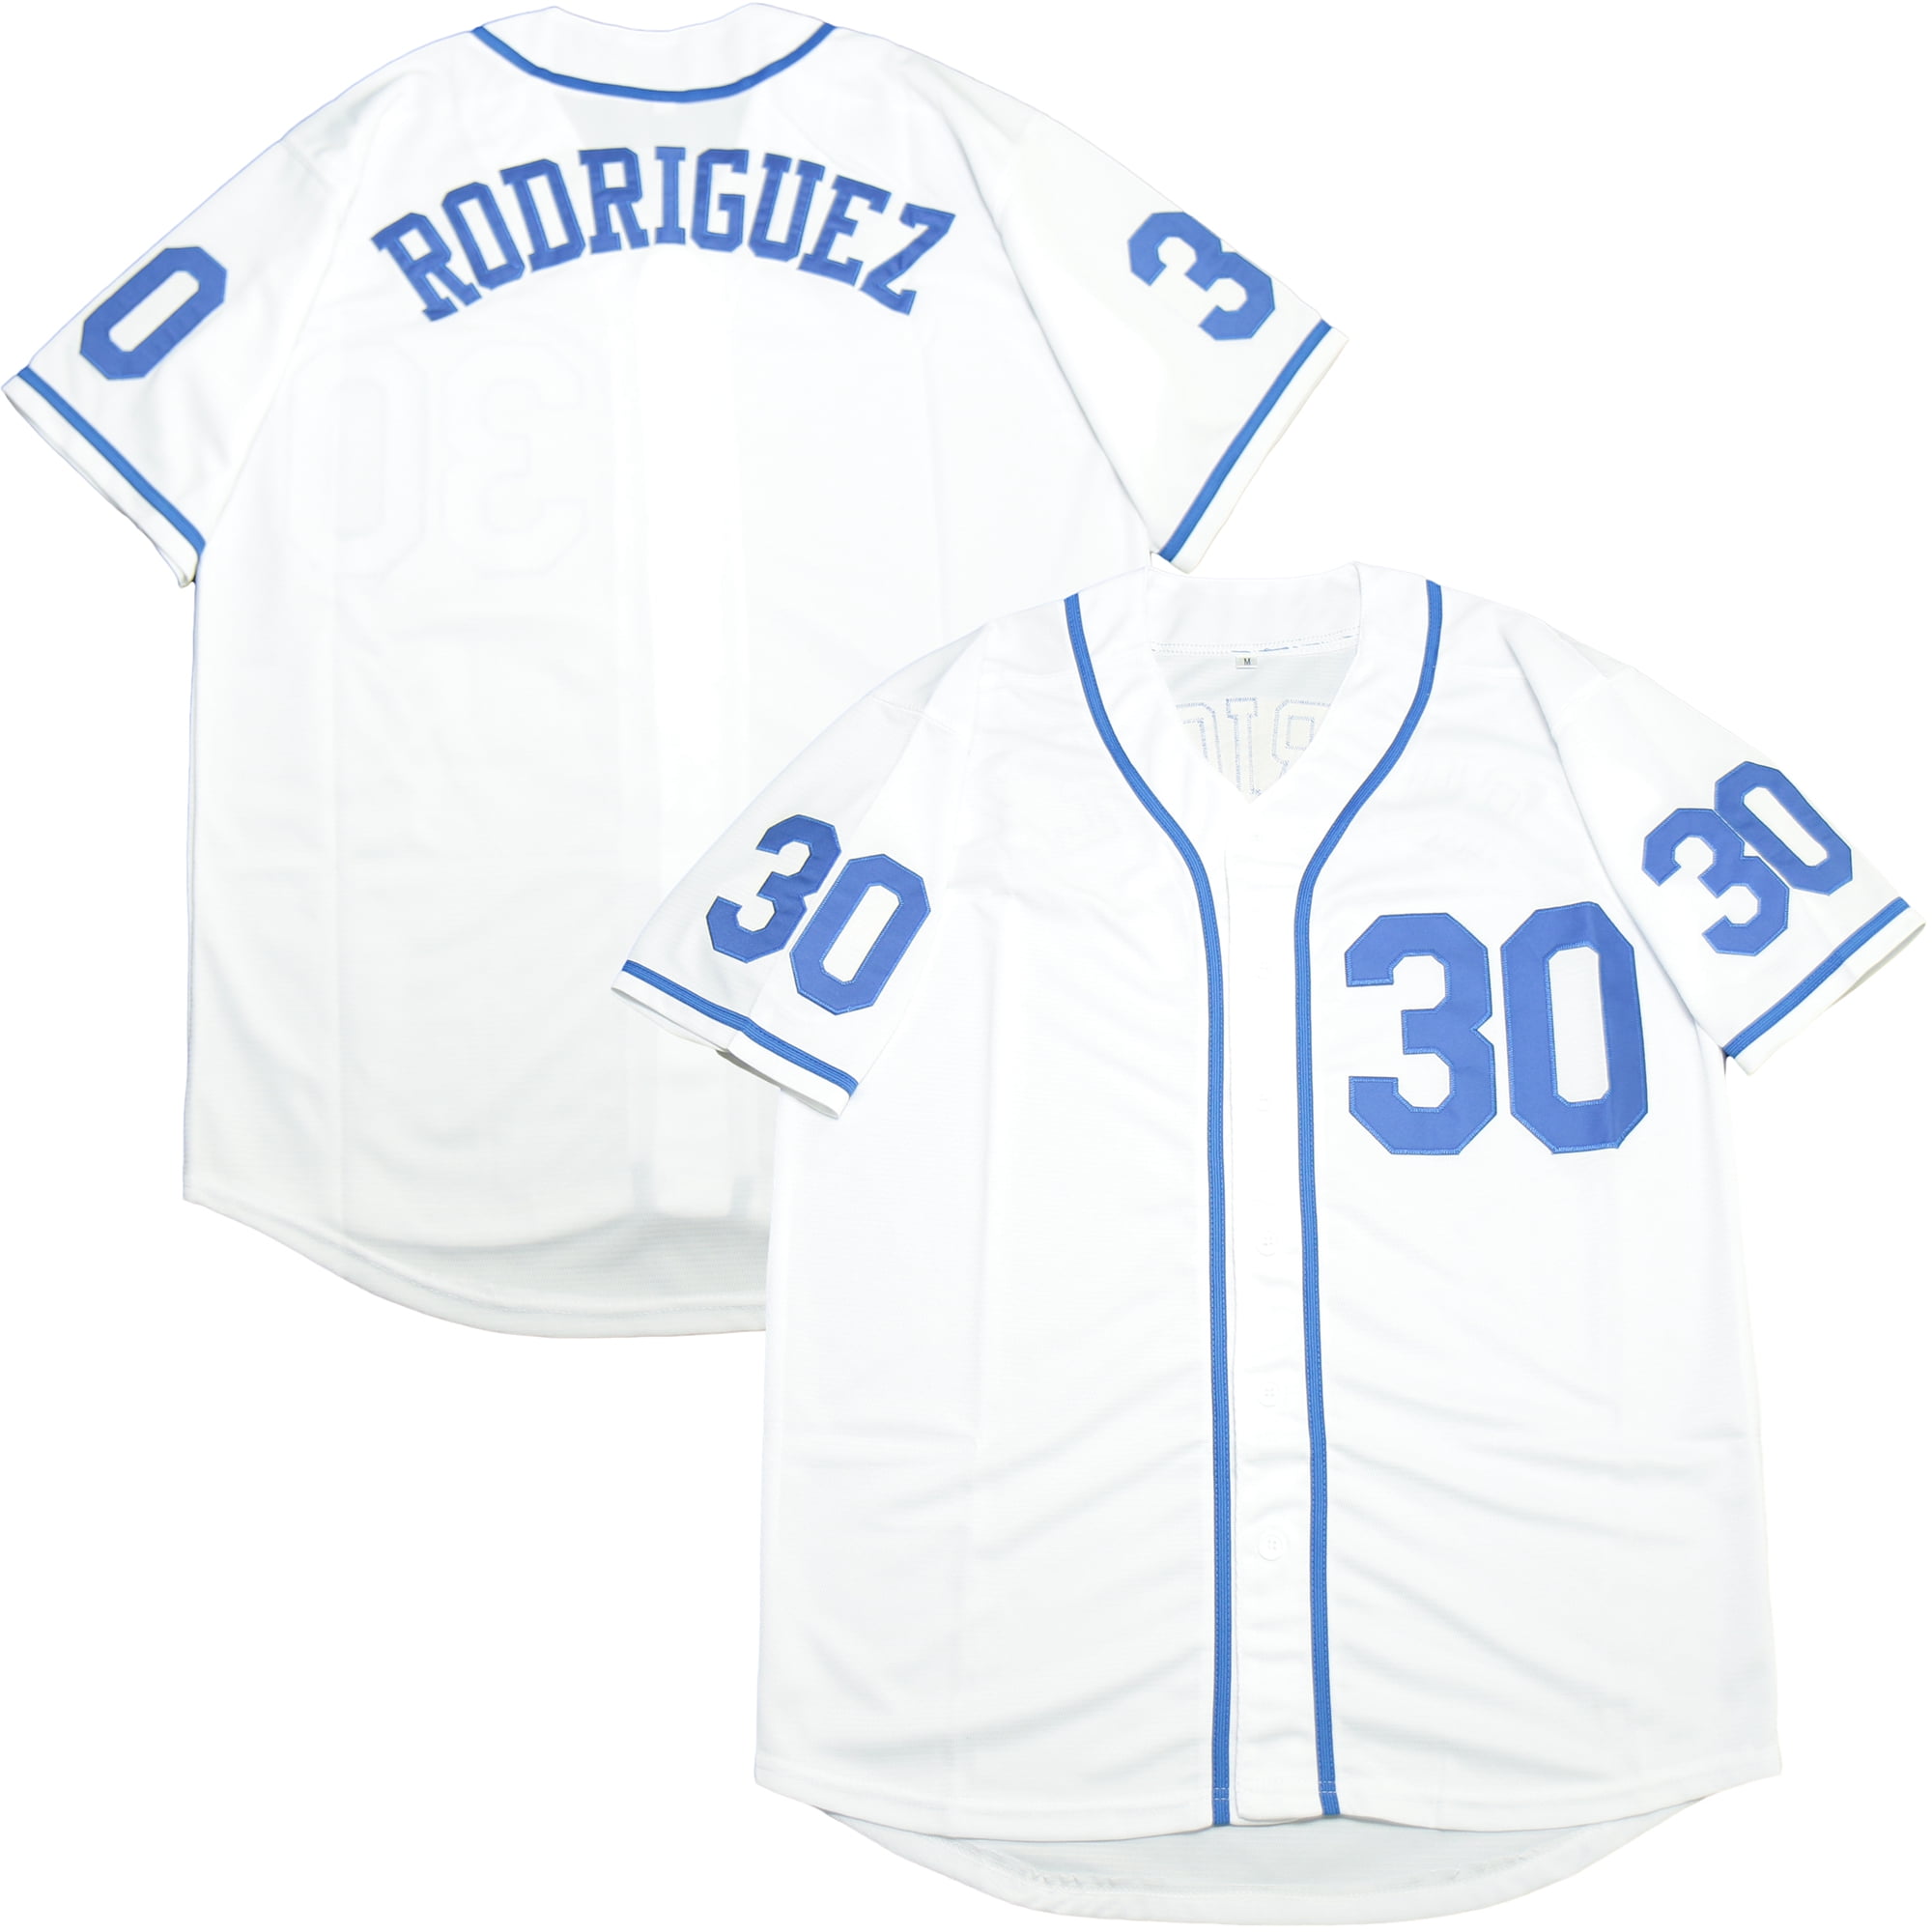 Special Edition Benny The Jet Rodriguez #30 Baseball Jersey